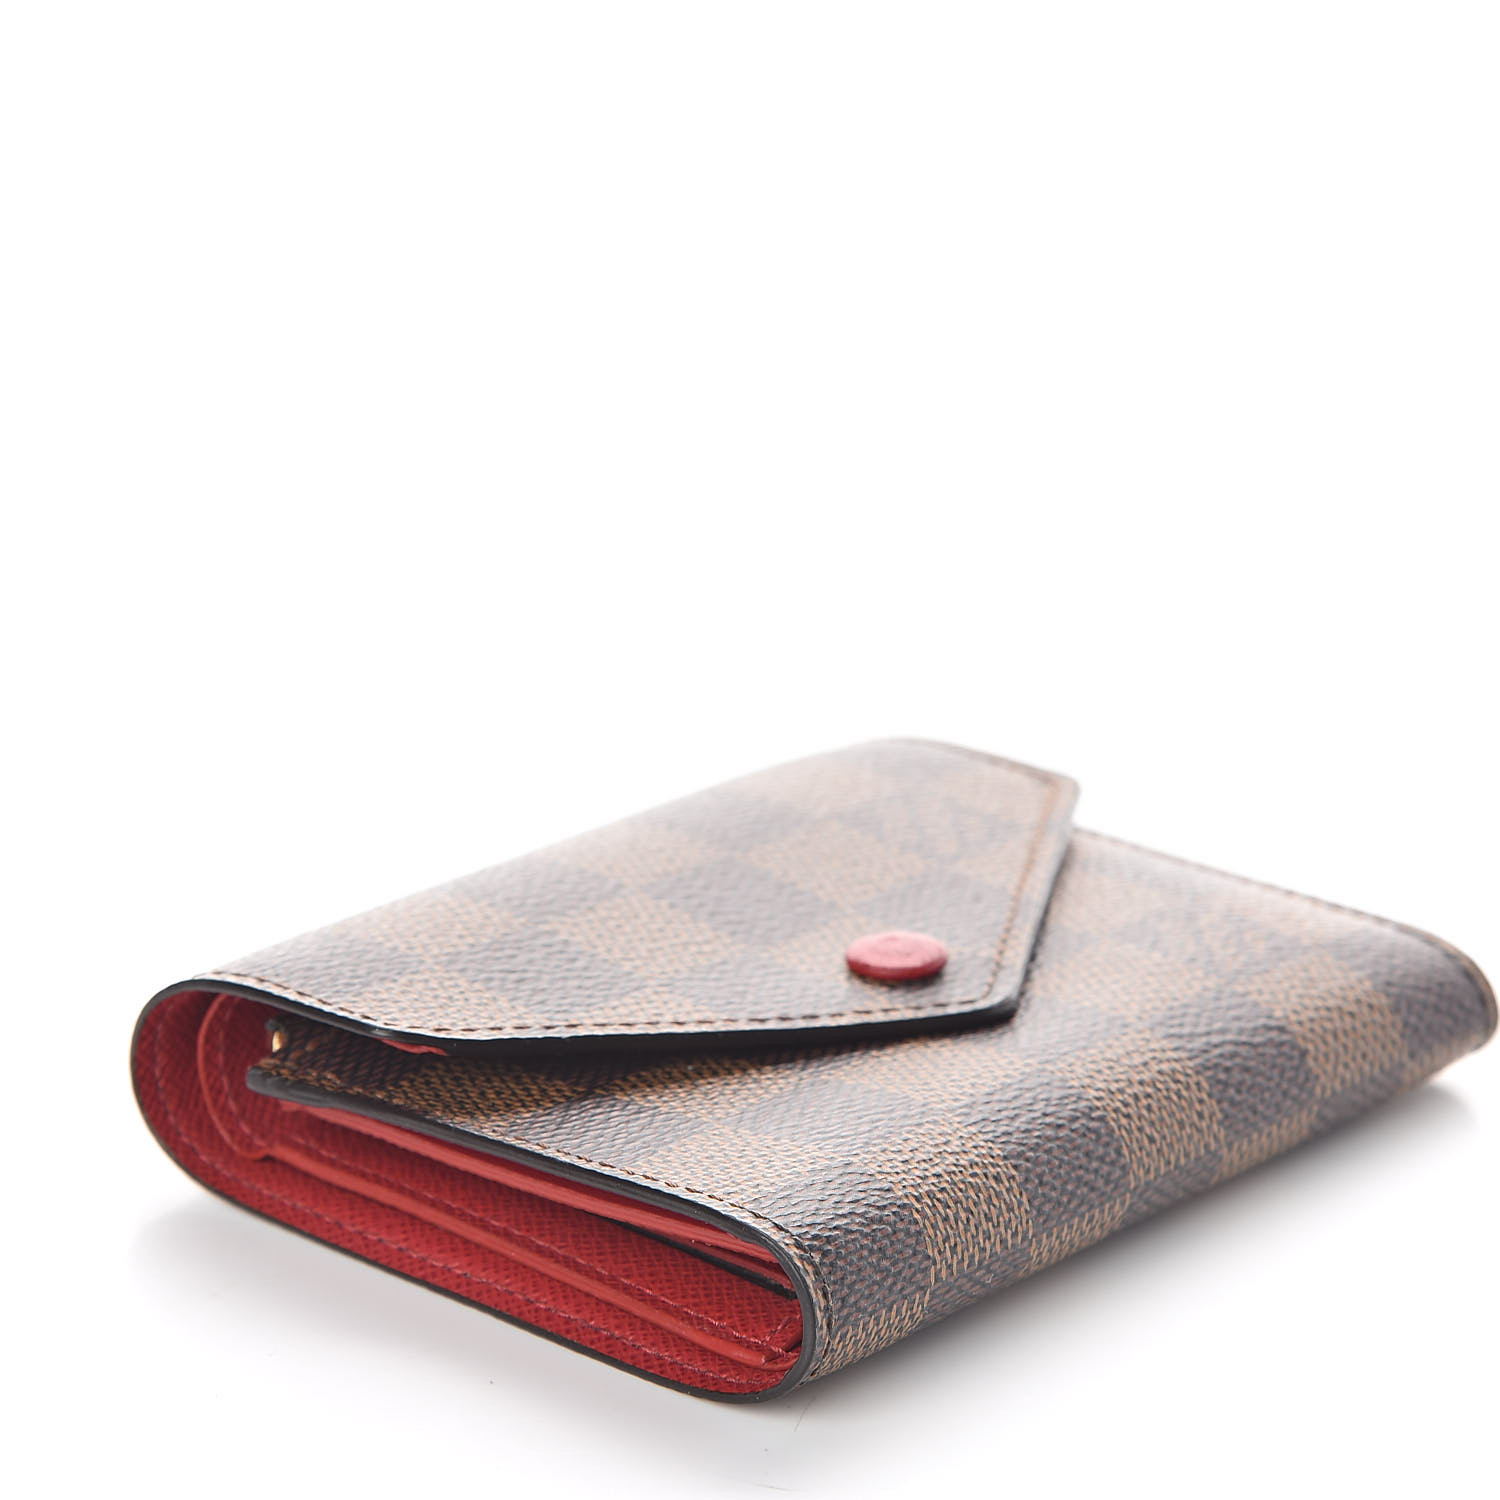 Victorine wallet Damier Ebene Canvas - Wallets and Small Leather Goods